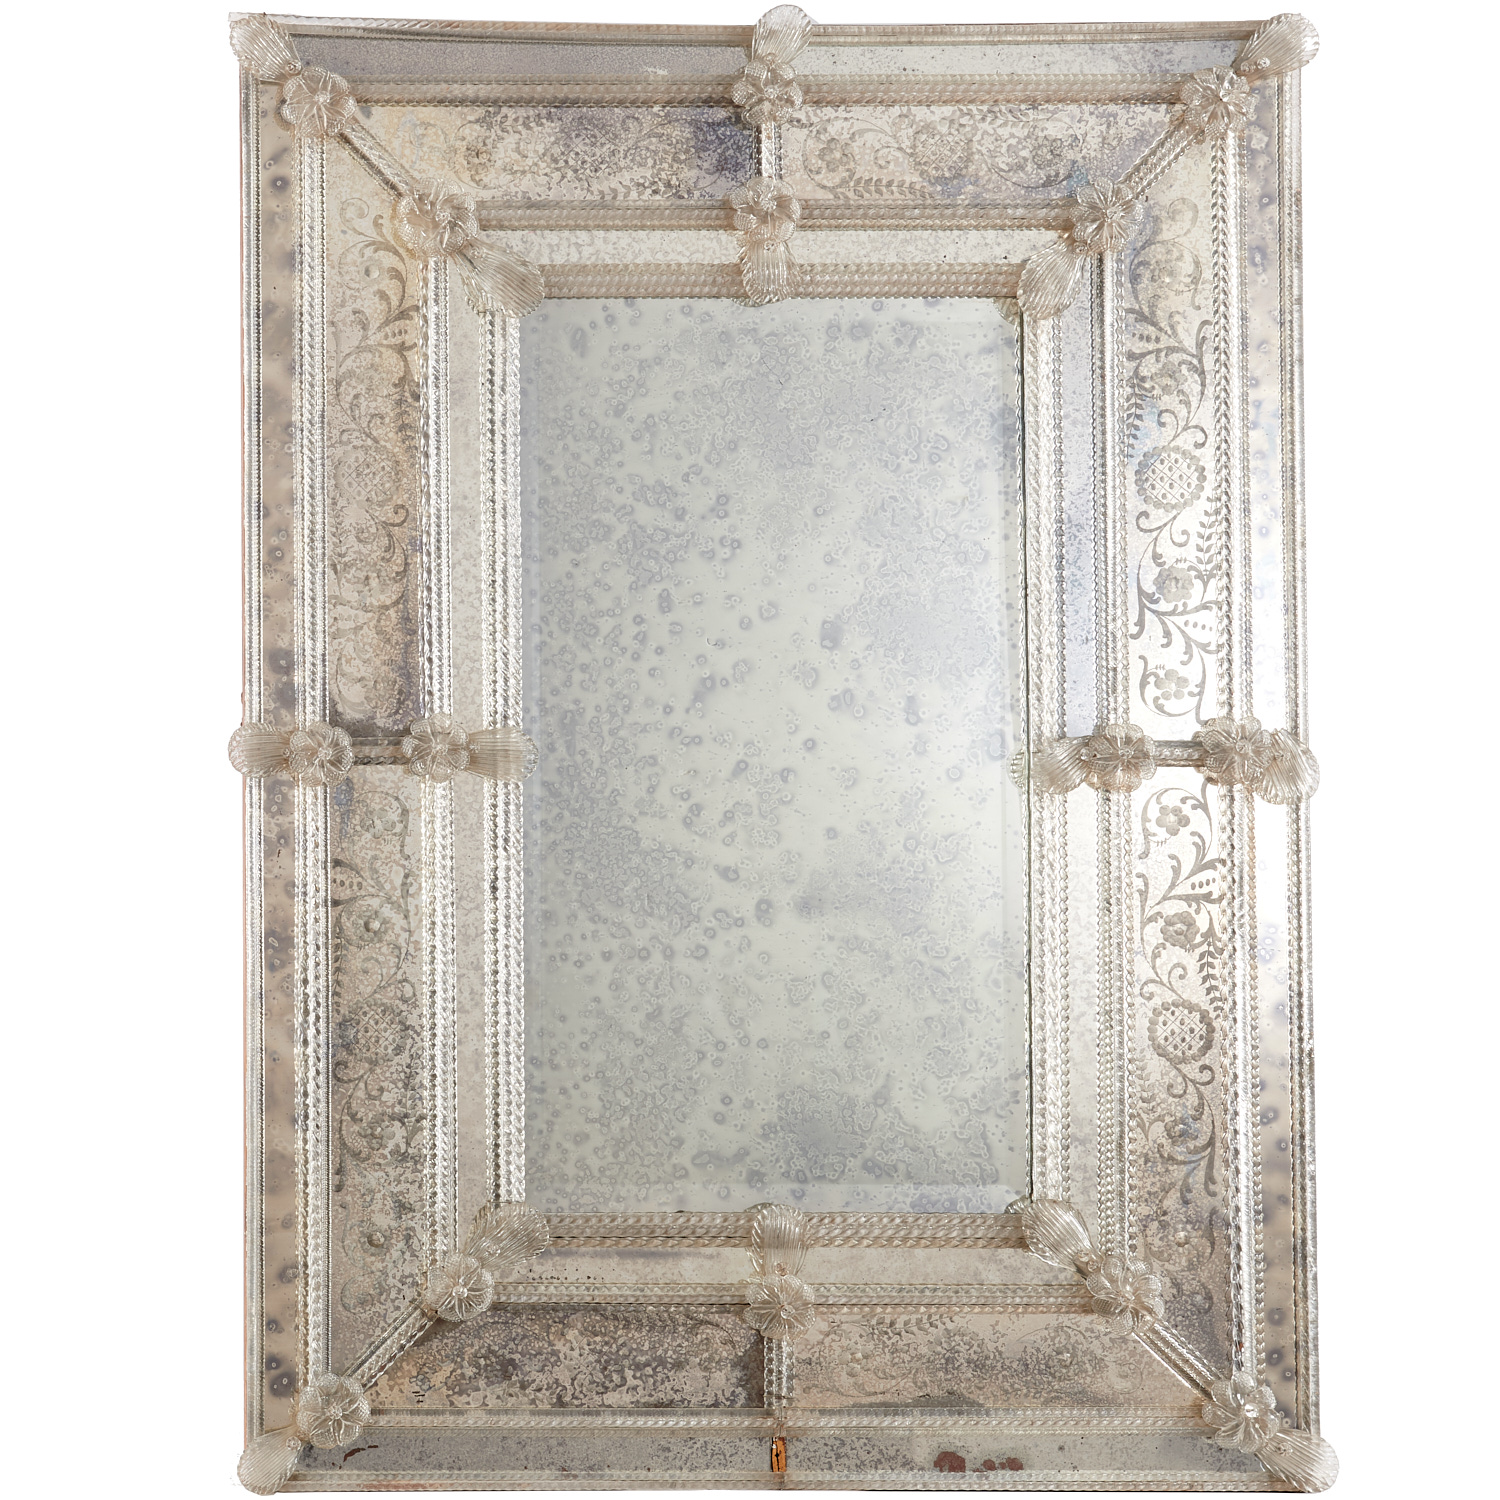 LARGE VENETIAN ETCHED AND CANEWORK 3628ac